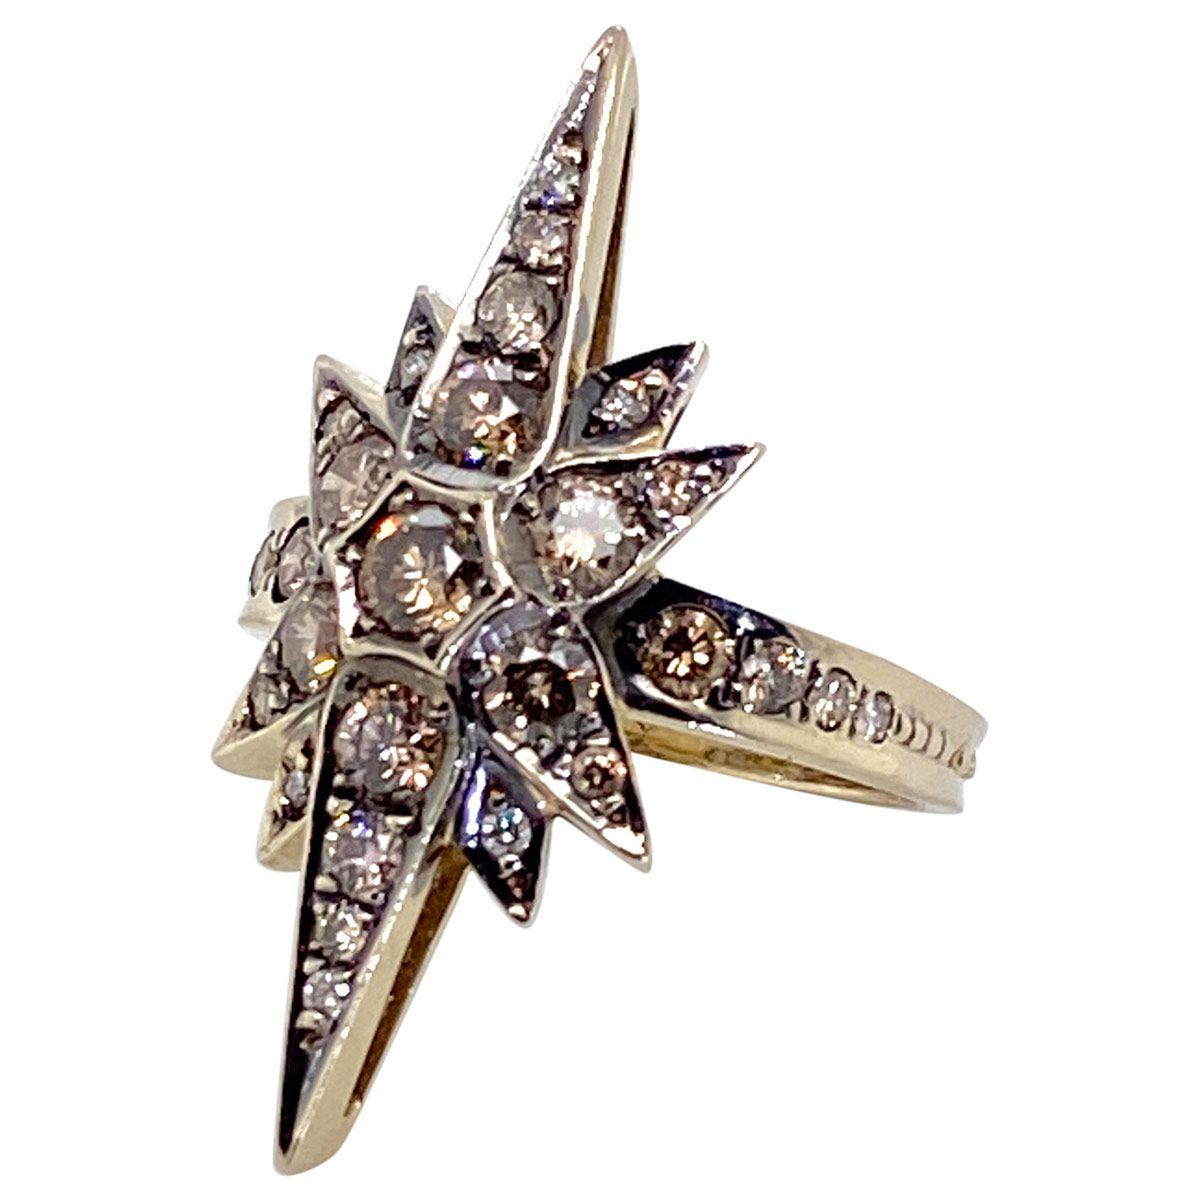 H Stern, one of my favourite jewellery designers has created the Stars collection which has been so popular and has become iconic in the jewellery world. This large Stars ring with its combination of varying colours of cognac & champagne diamonds is